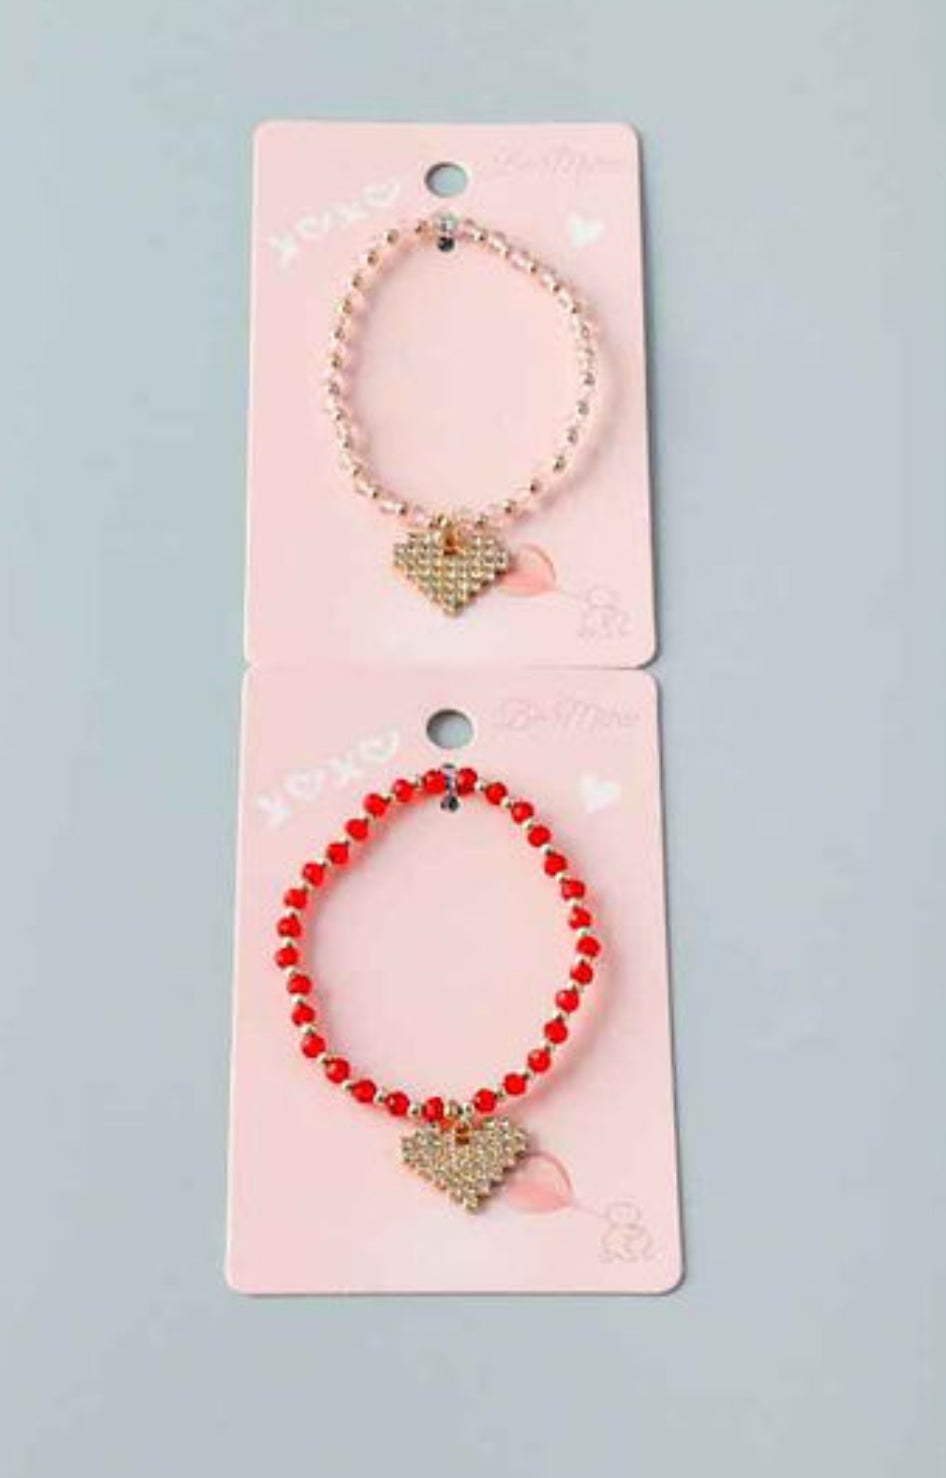 Beaded Stretch Sparkling Heart Charm Bracelet - In 2 Colors